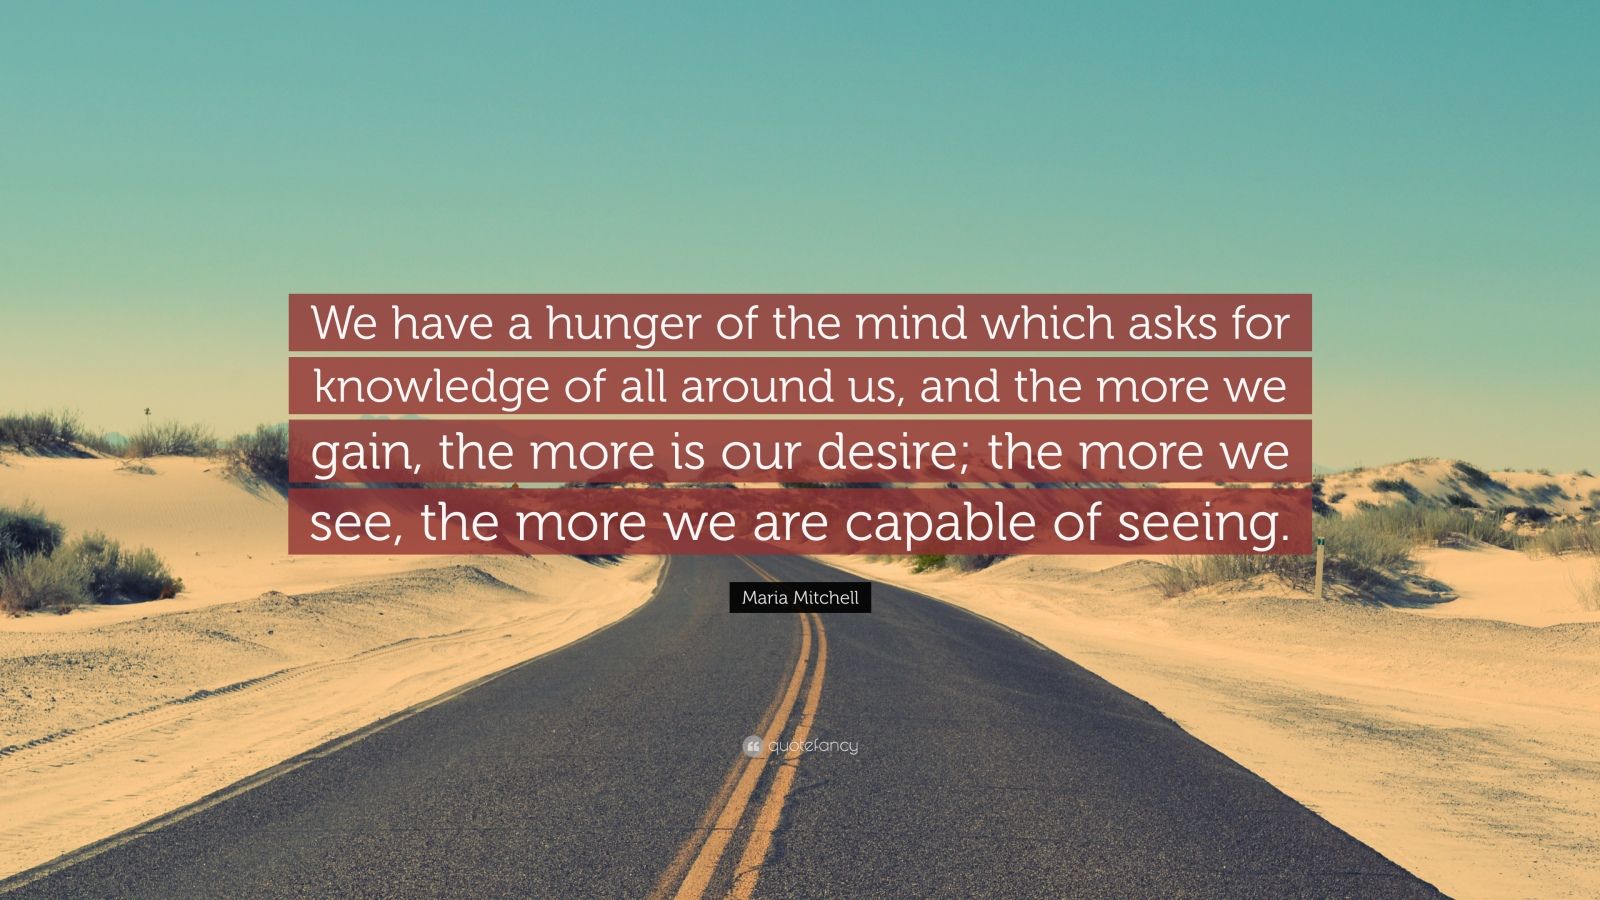 Maria Mitchell Quote: “We have a hunger of the mind which asks for ...